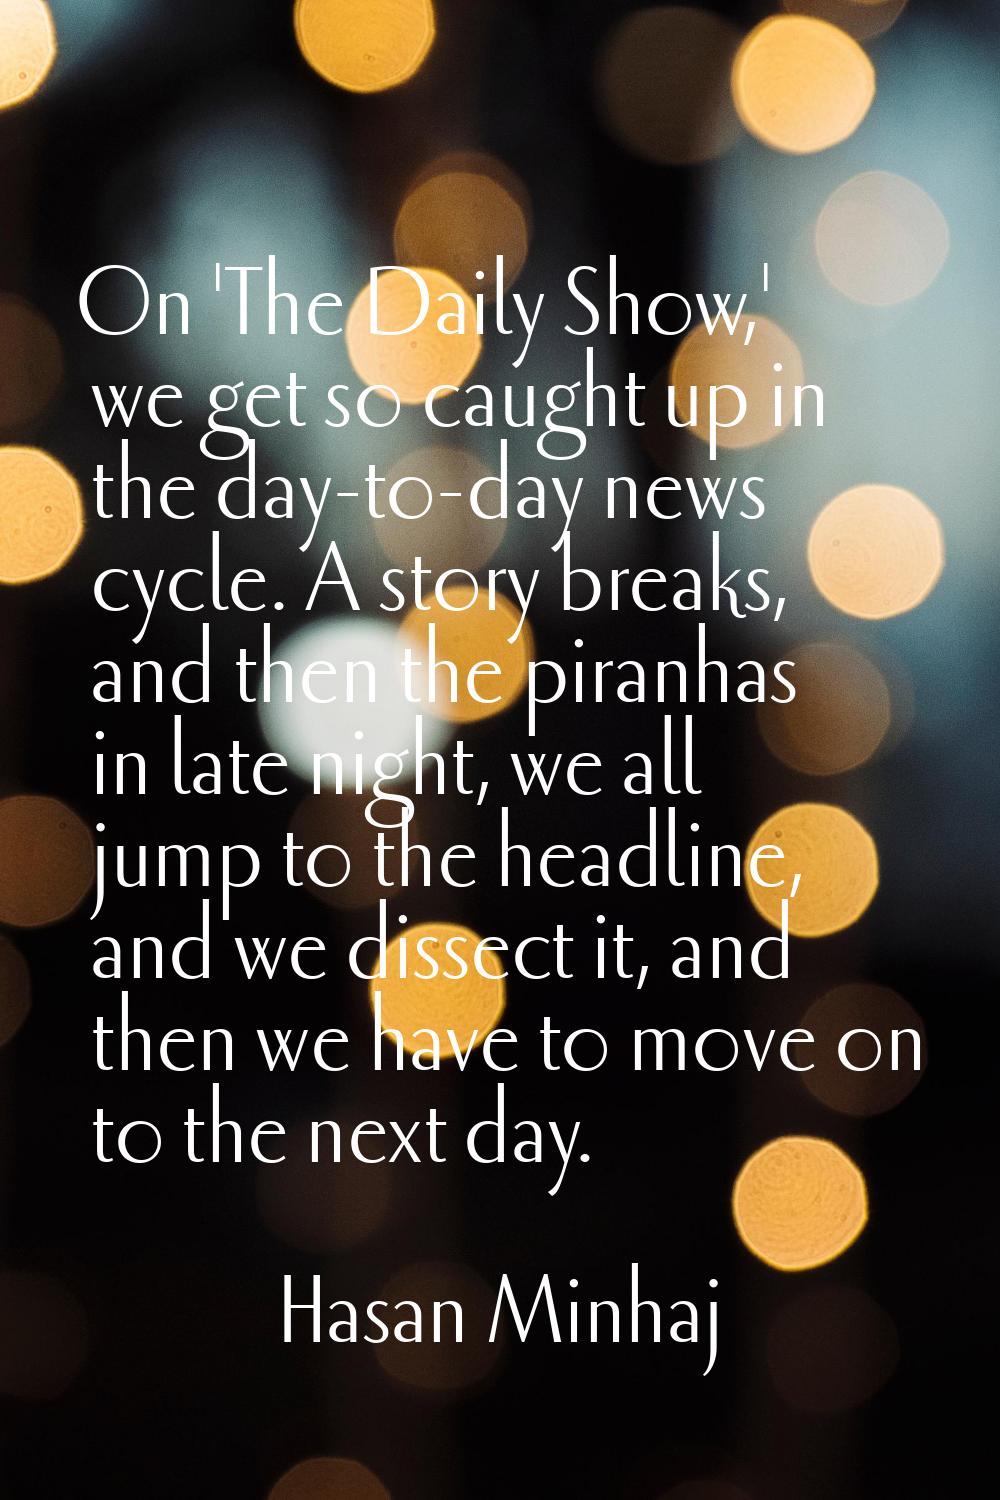 On 'The Daily Show,' we get so caught up in the day-to-day news cycle. A story breaks, and then the